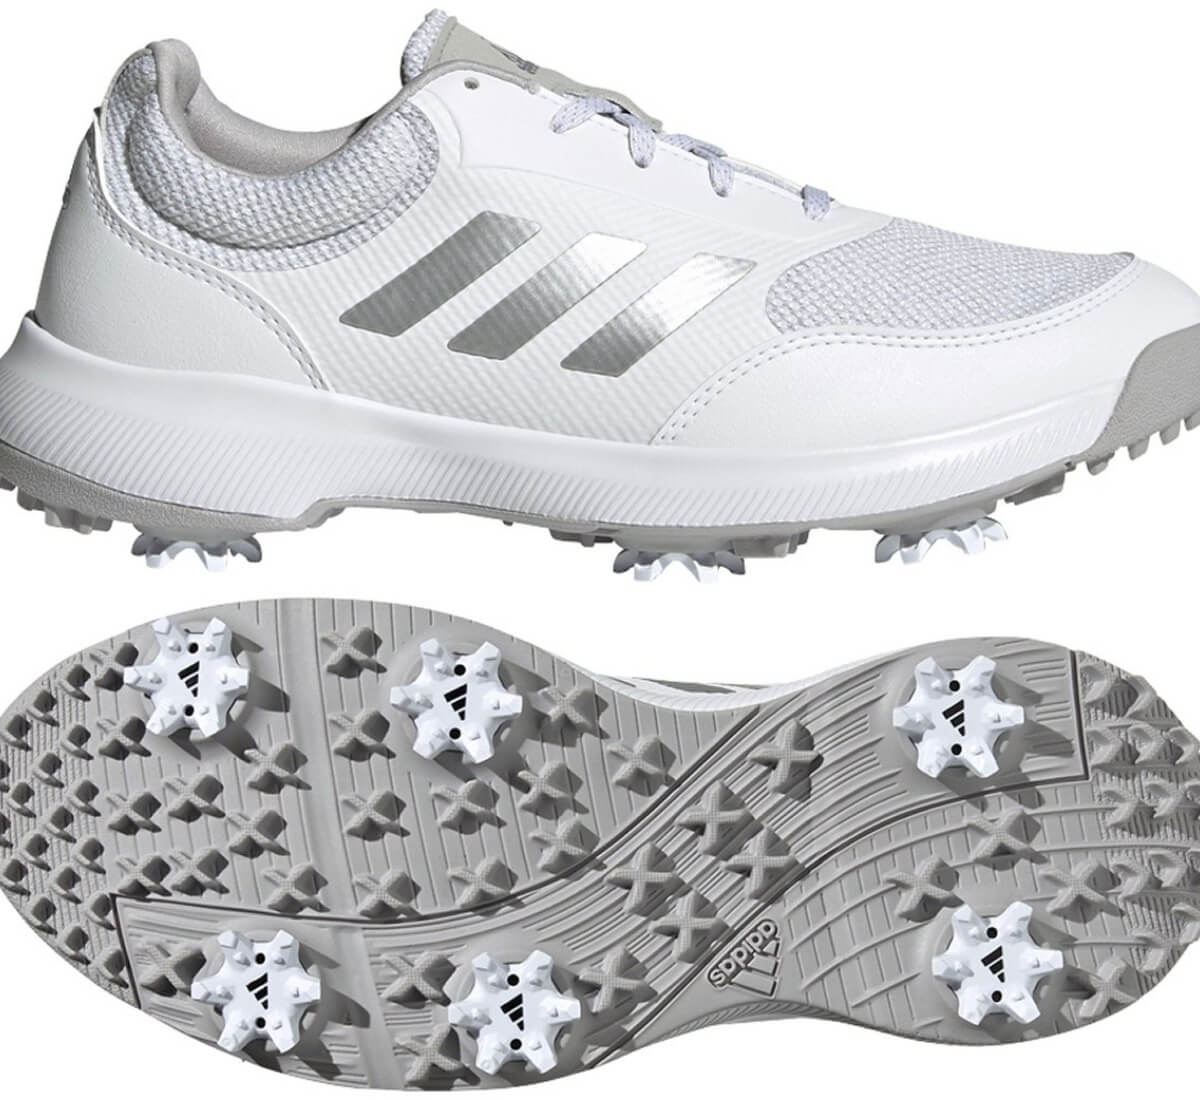 The best women's golf shoes of 2023